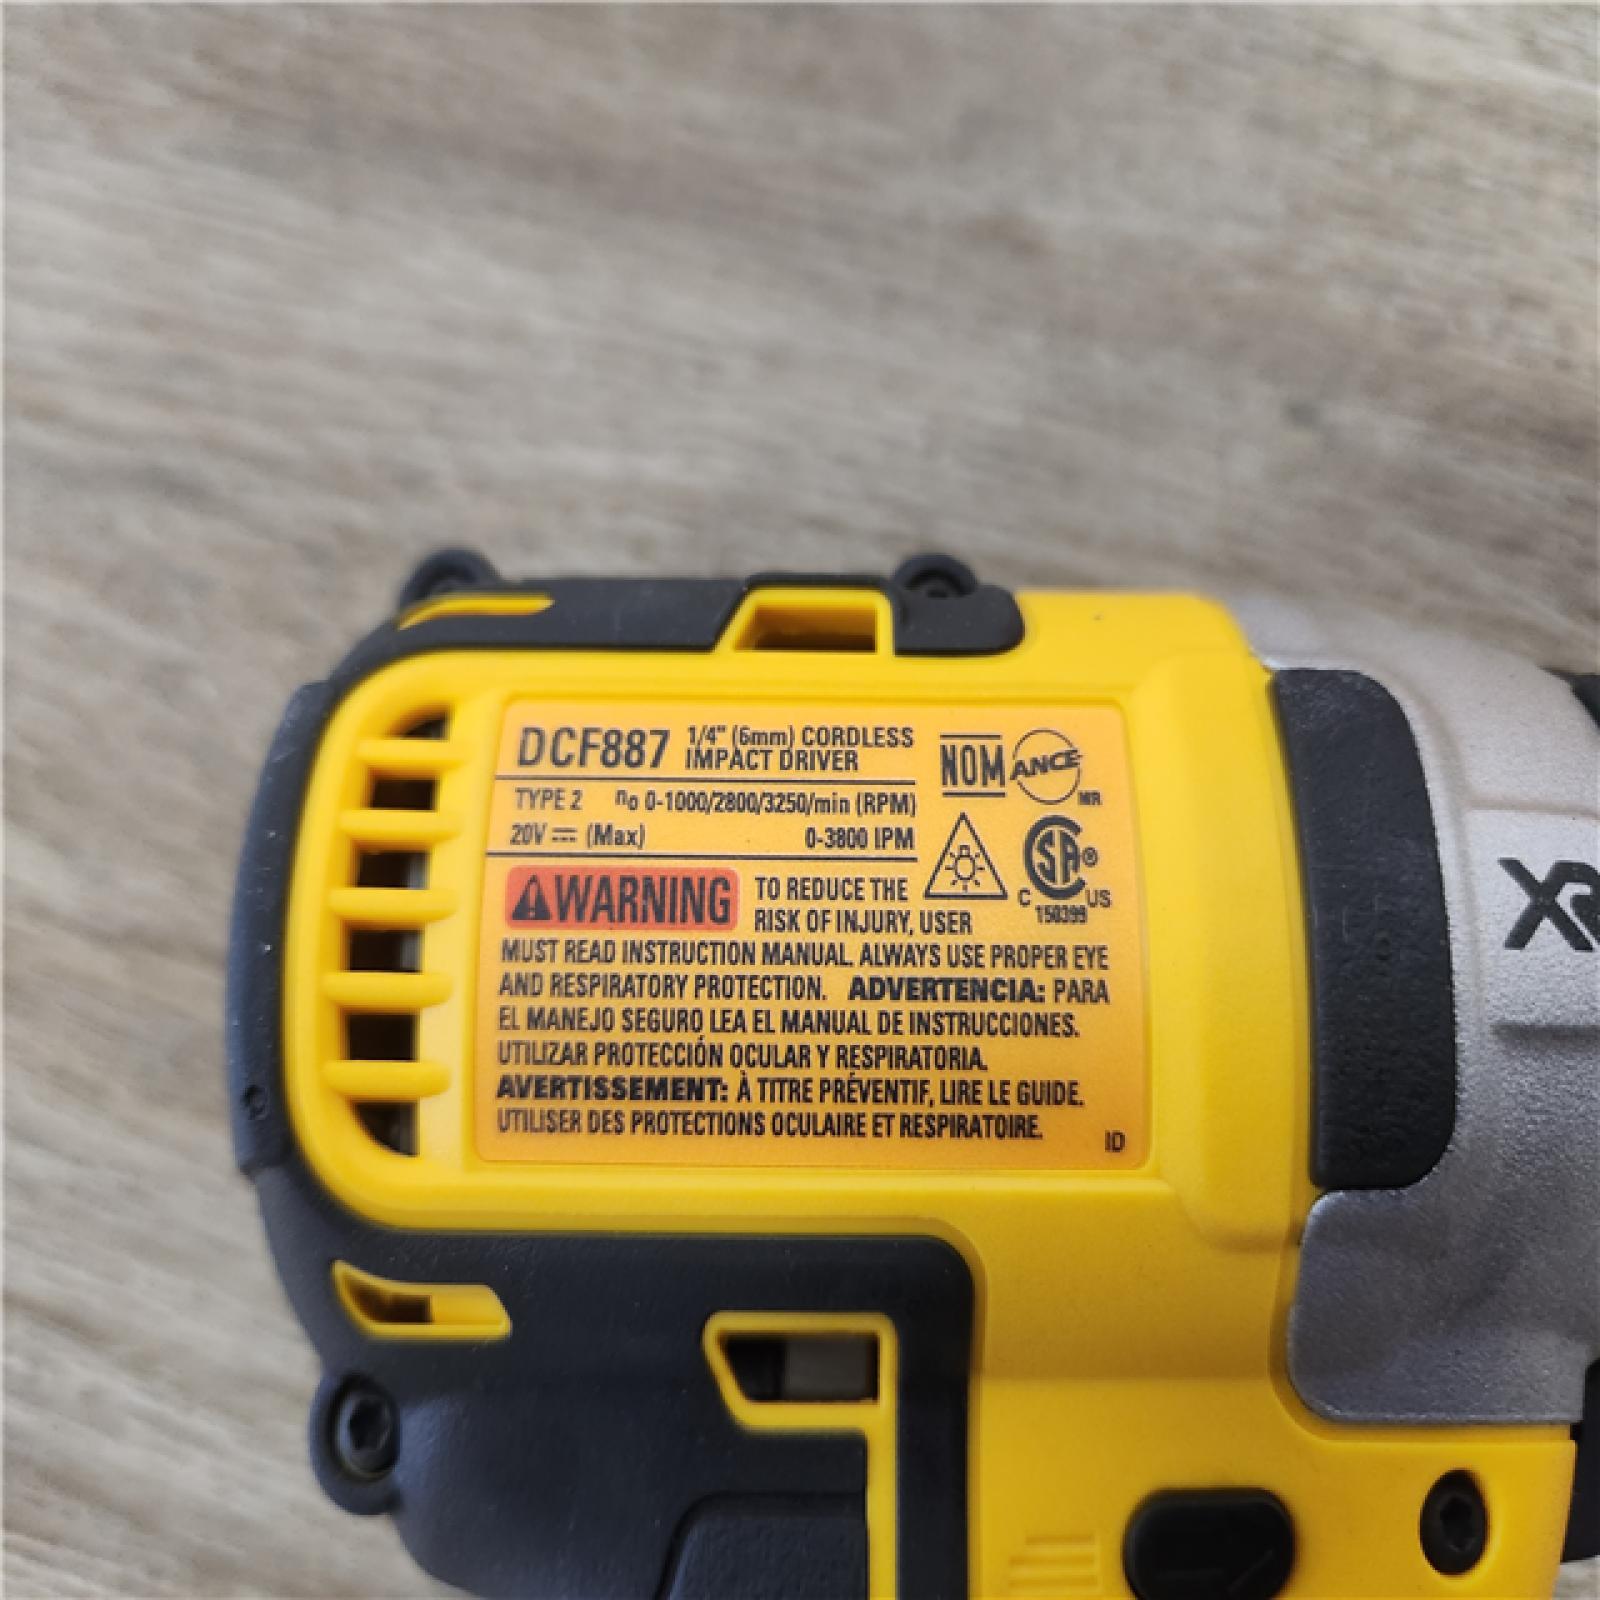 Phoenix Location NEW DEWALT 20V MAX XR Lithium-Ion Cordless Brushless 1/4 in. Impact Driver (2), Charger, 2.0Ah Battery and 6.0Ah Battery